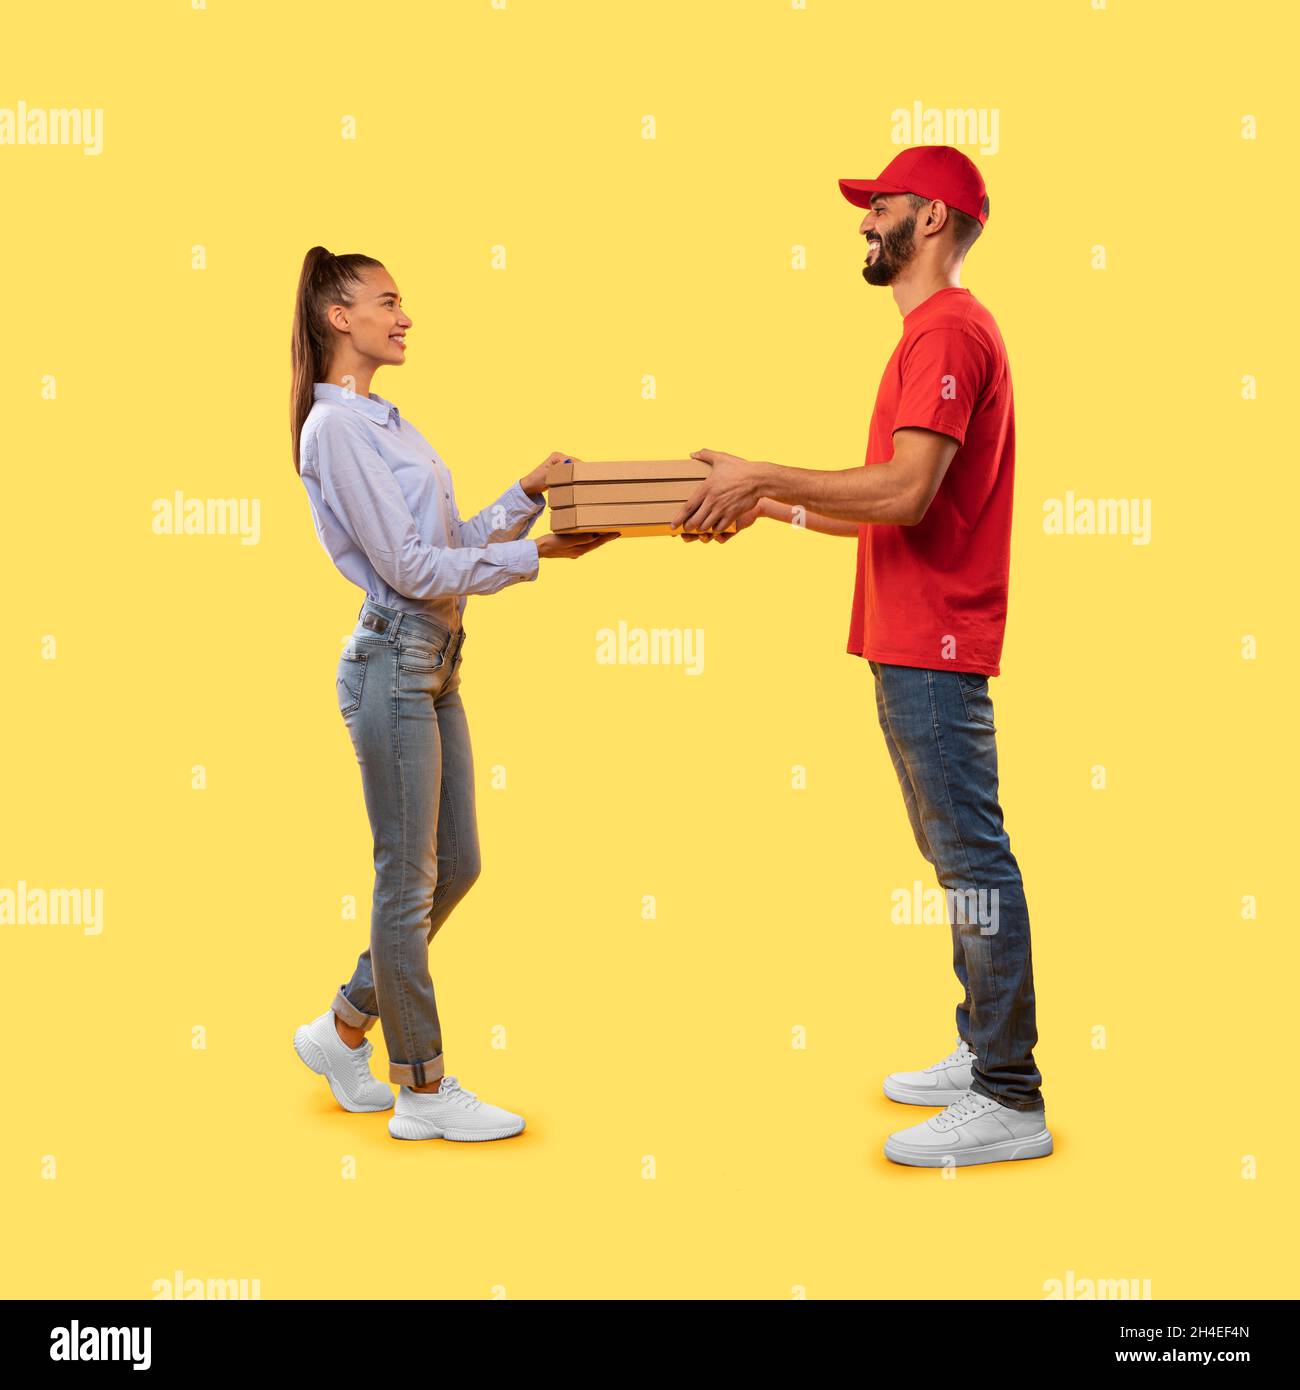 Arabic Courier Guy Giving Pizza To Female Over Yellow Background Stock Photo